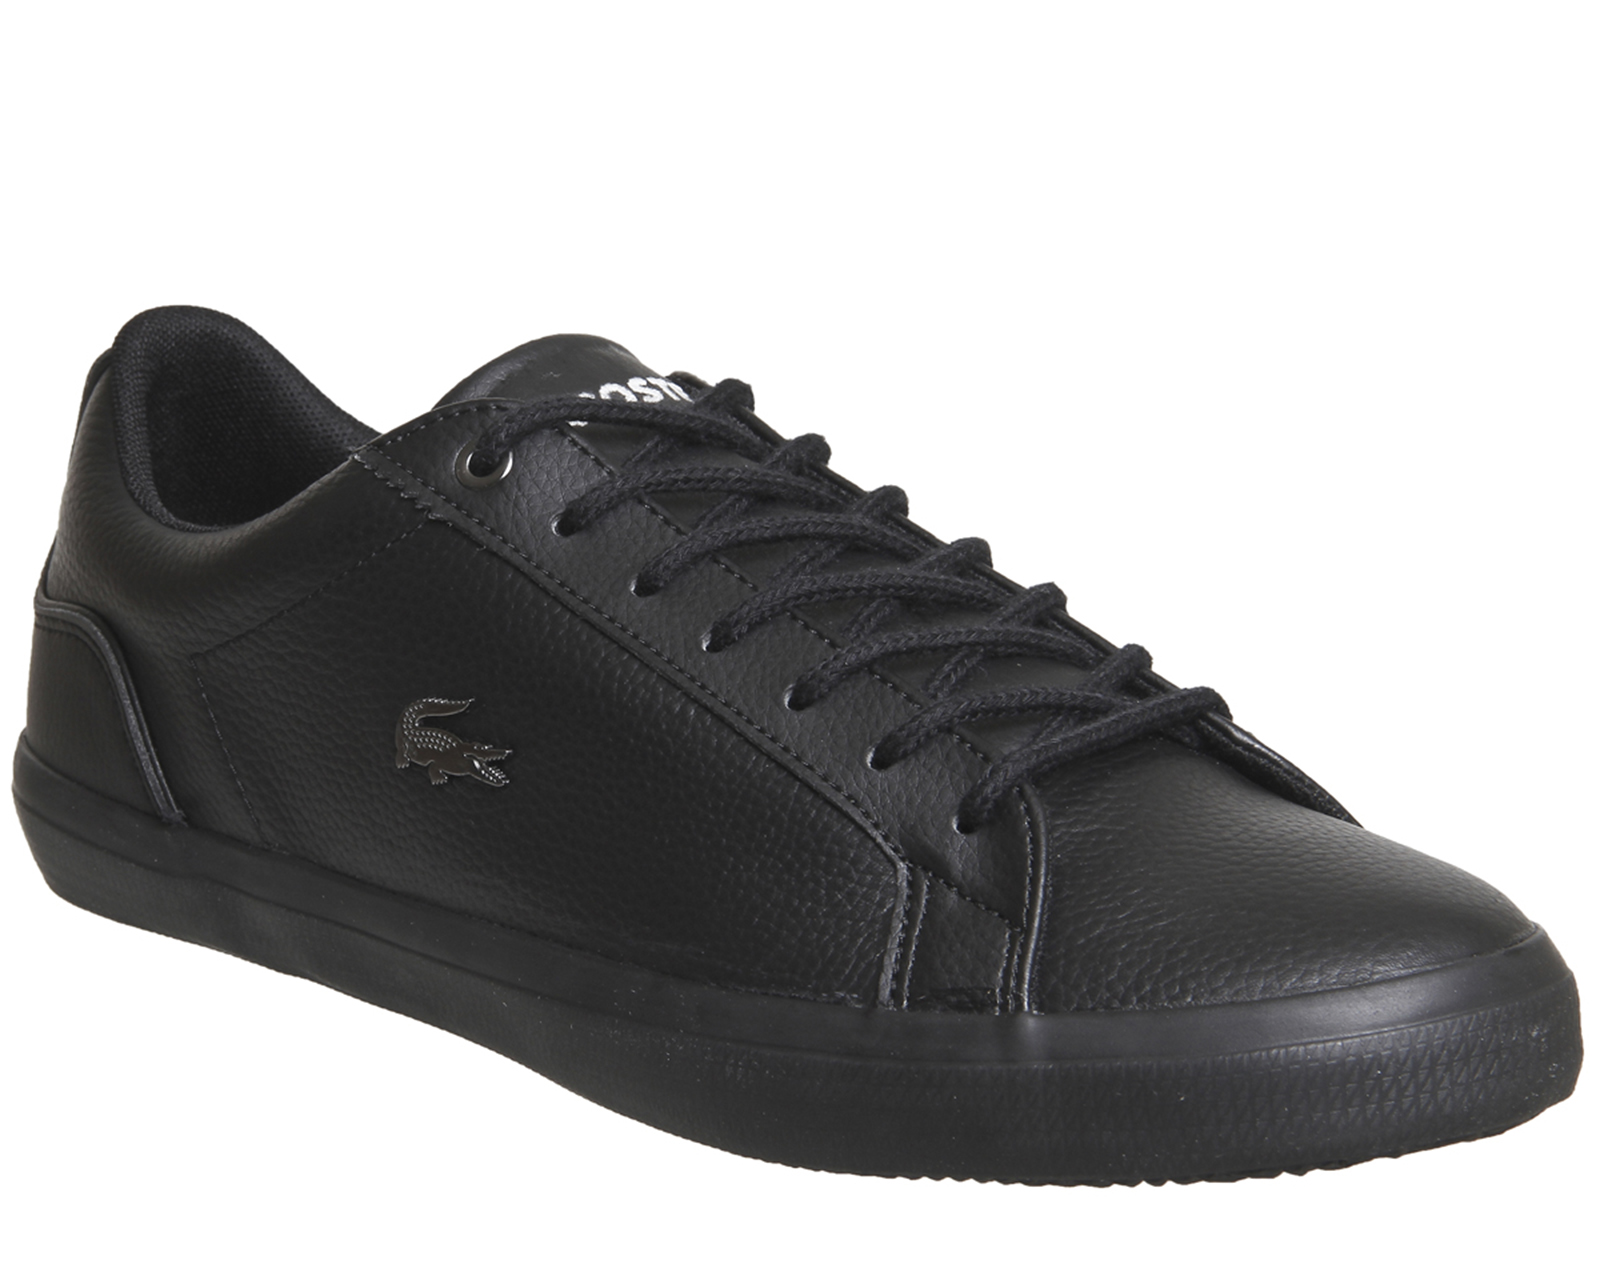 Lacoste Lerond Black - His trainers